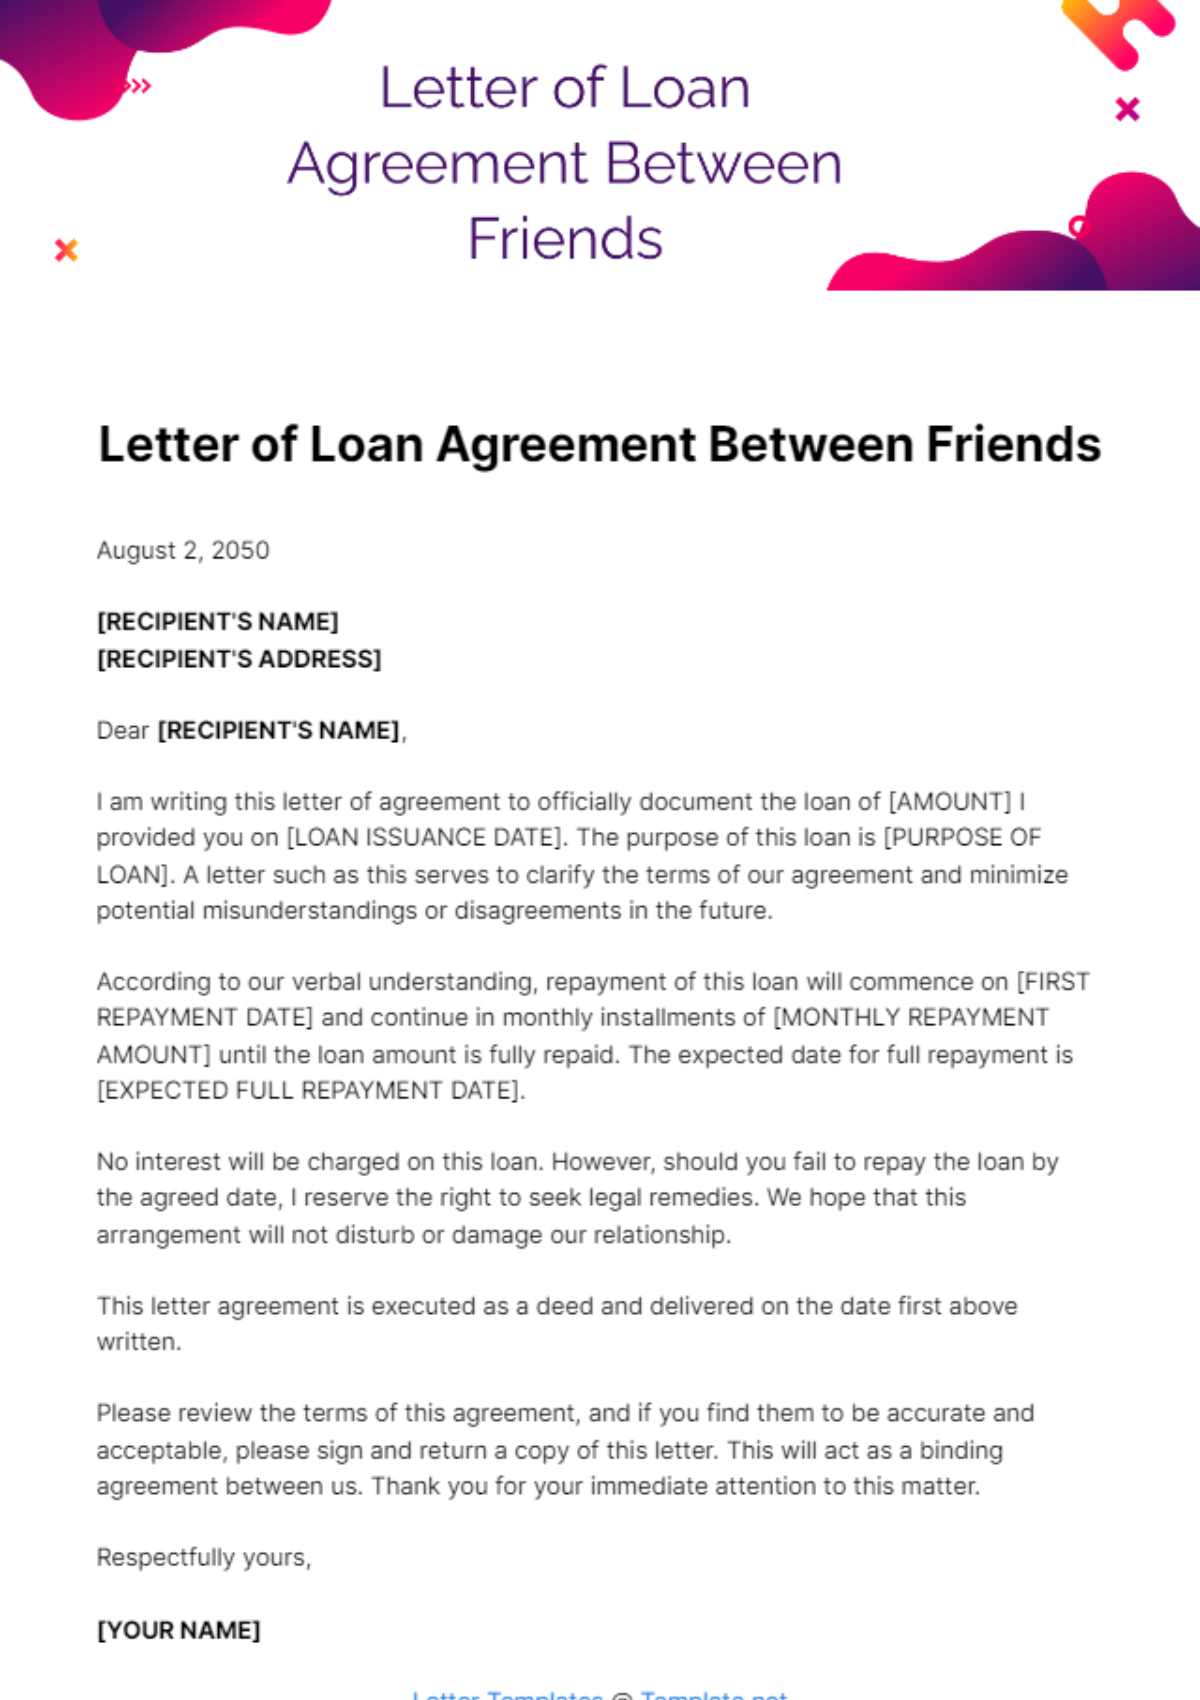 Free Letter of Loan Agreement Between Friends Template